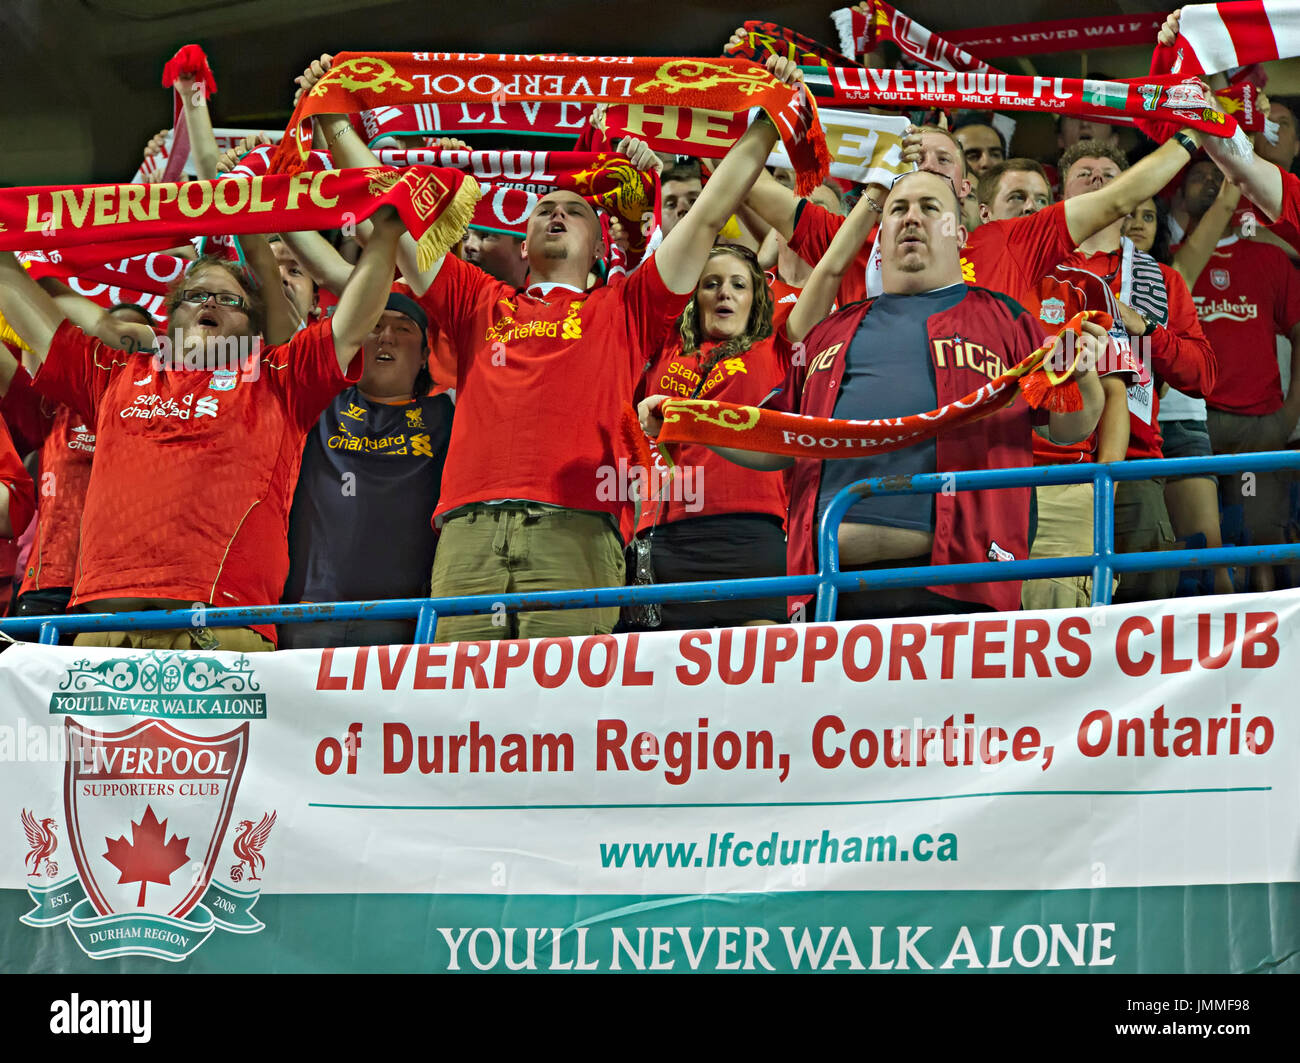 Liverpool fans turned out in their thousands to watch Liverpool's first pre-season match of their North American tour against Toronto FC at the Rogers Centre in Toronto, Canada, July 21 2012. Brendan Rodgers first game in charge finished 1-1 with Adam Morgan scoring for Liverpool. Stock Photo